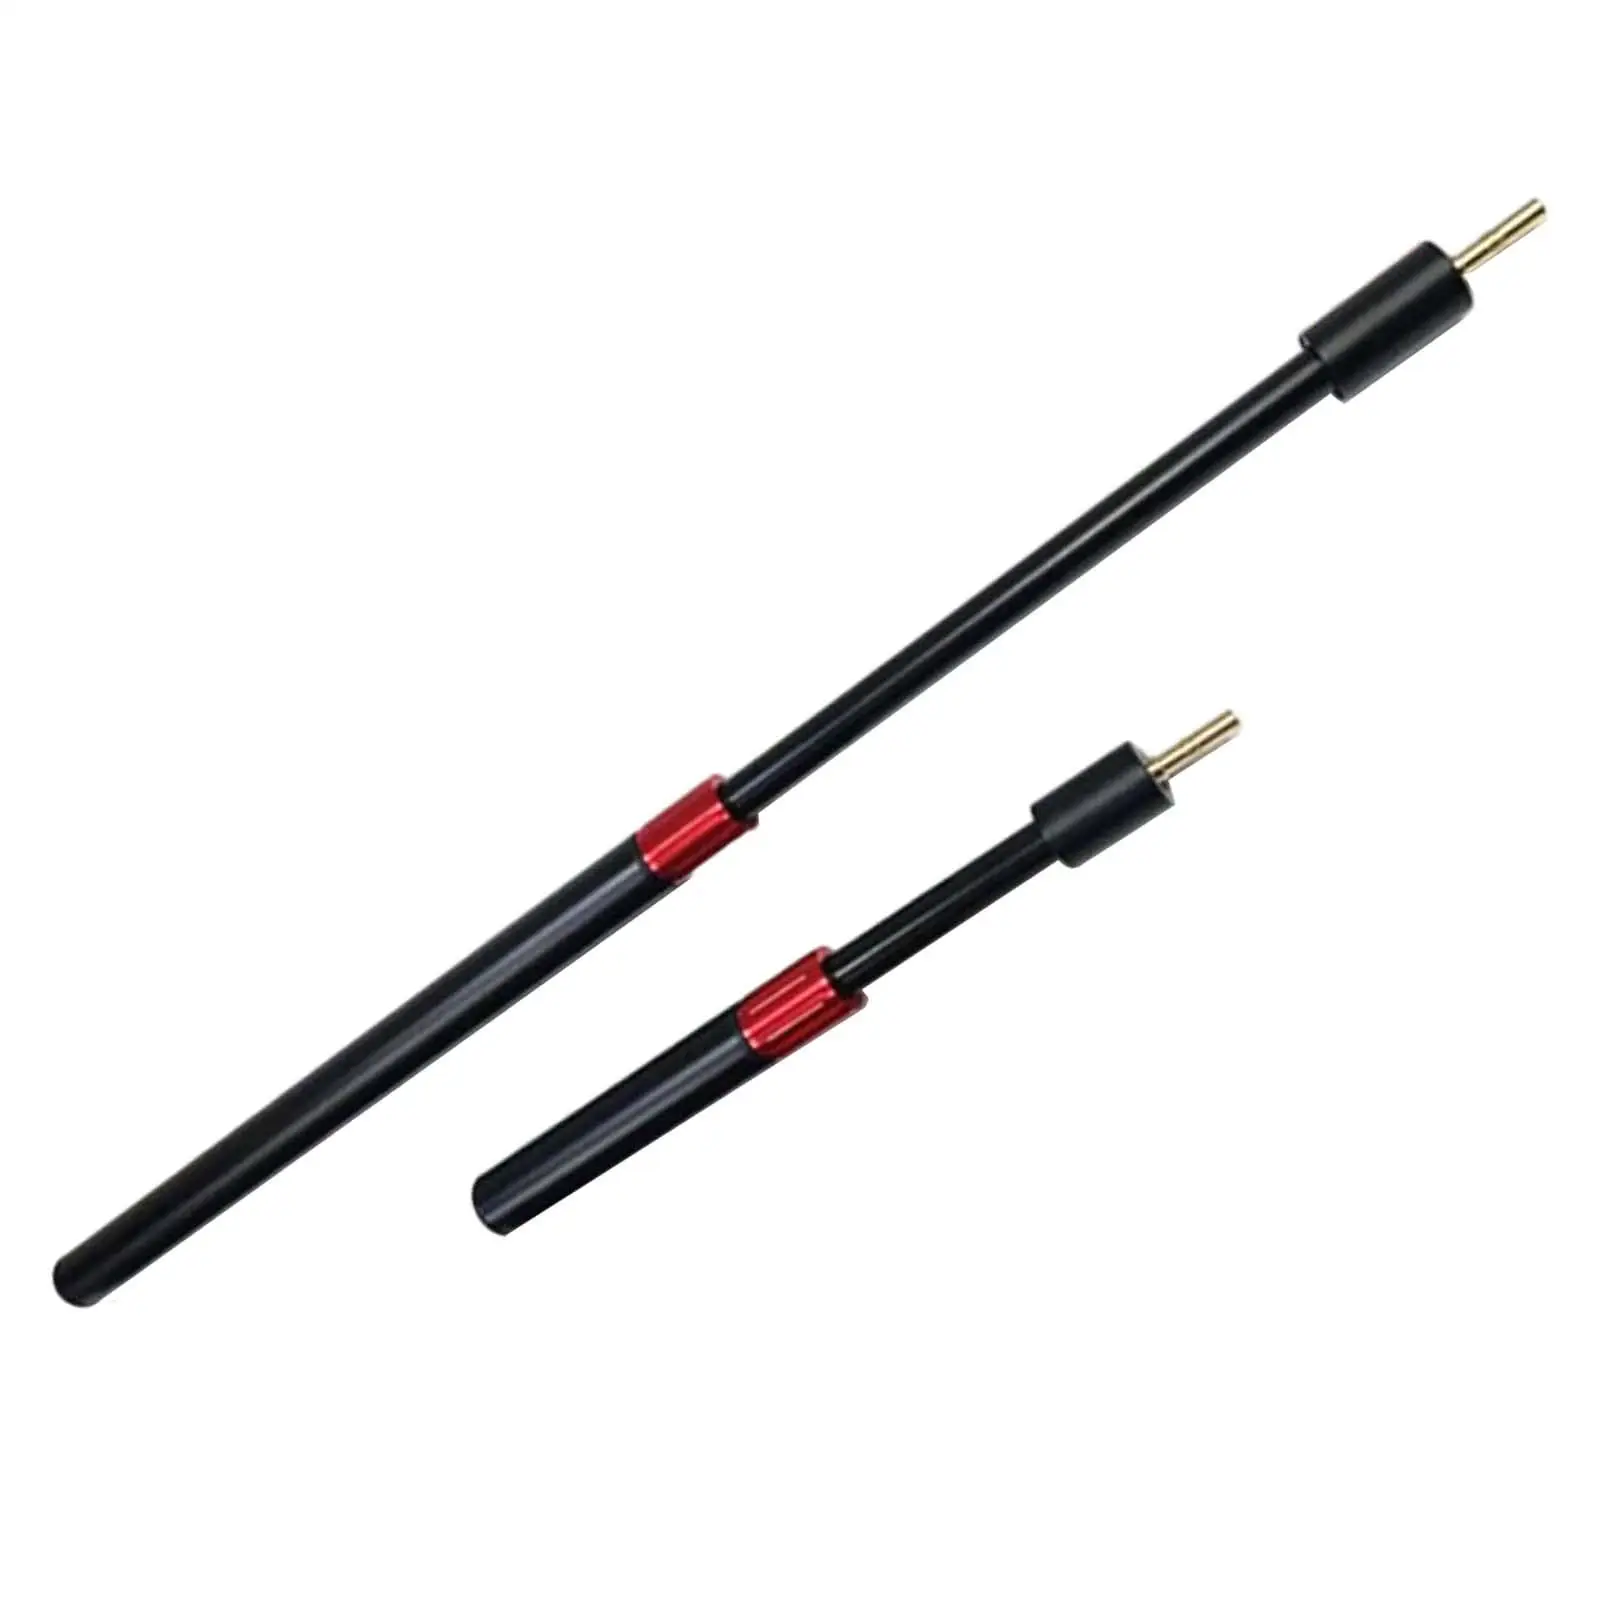 

2 Pieces Pool Cue Extender Telescopic Pool Cue Extension Cue End Lengthener